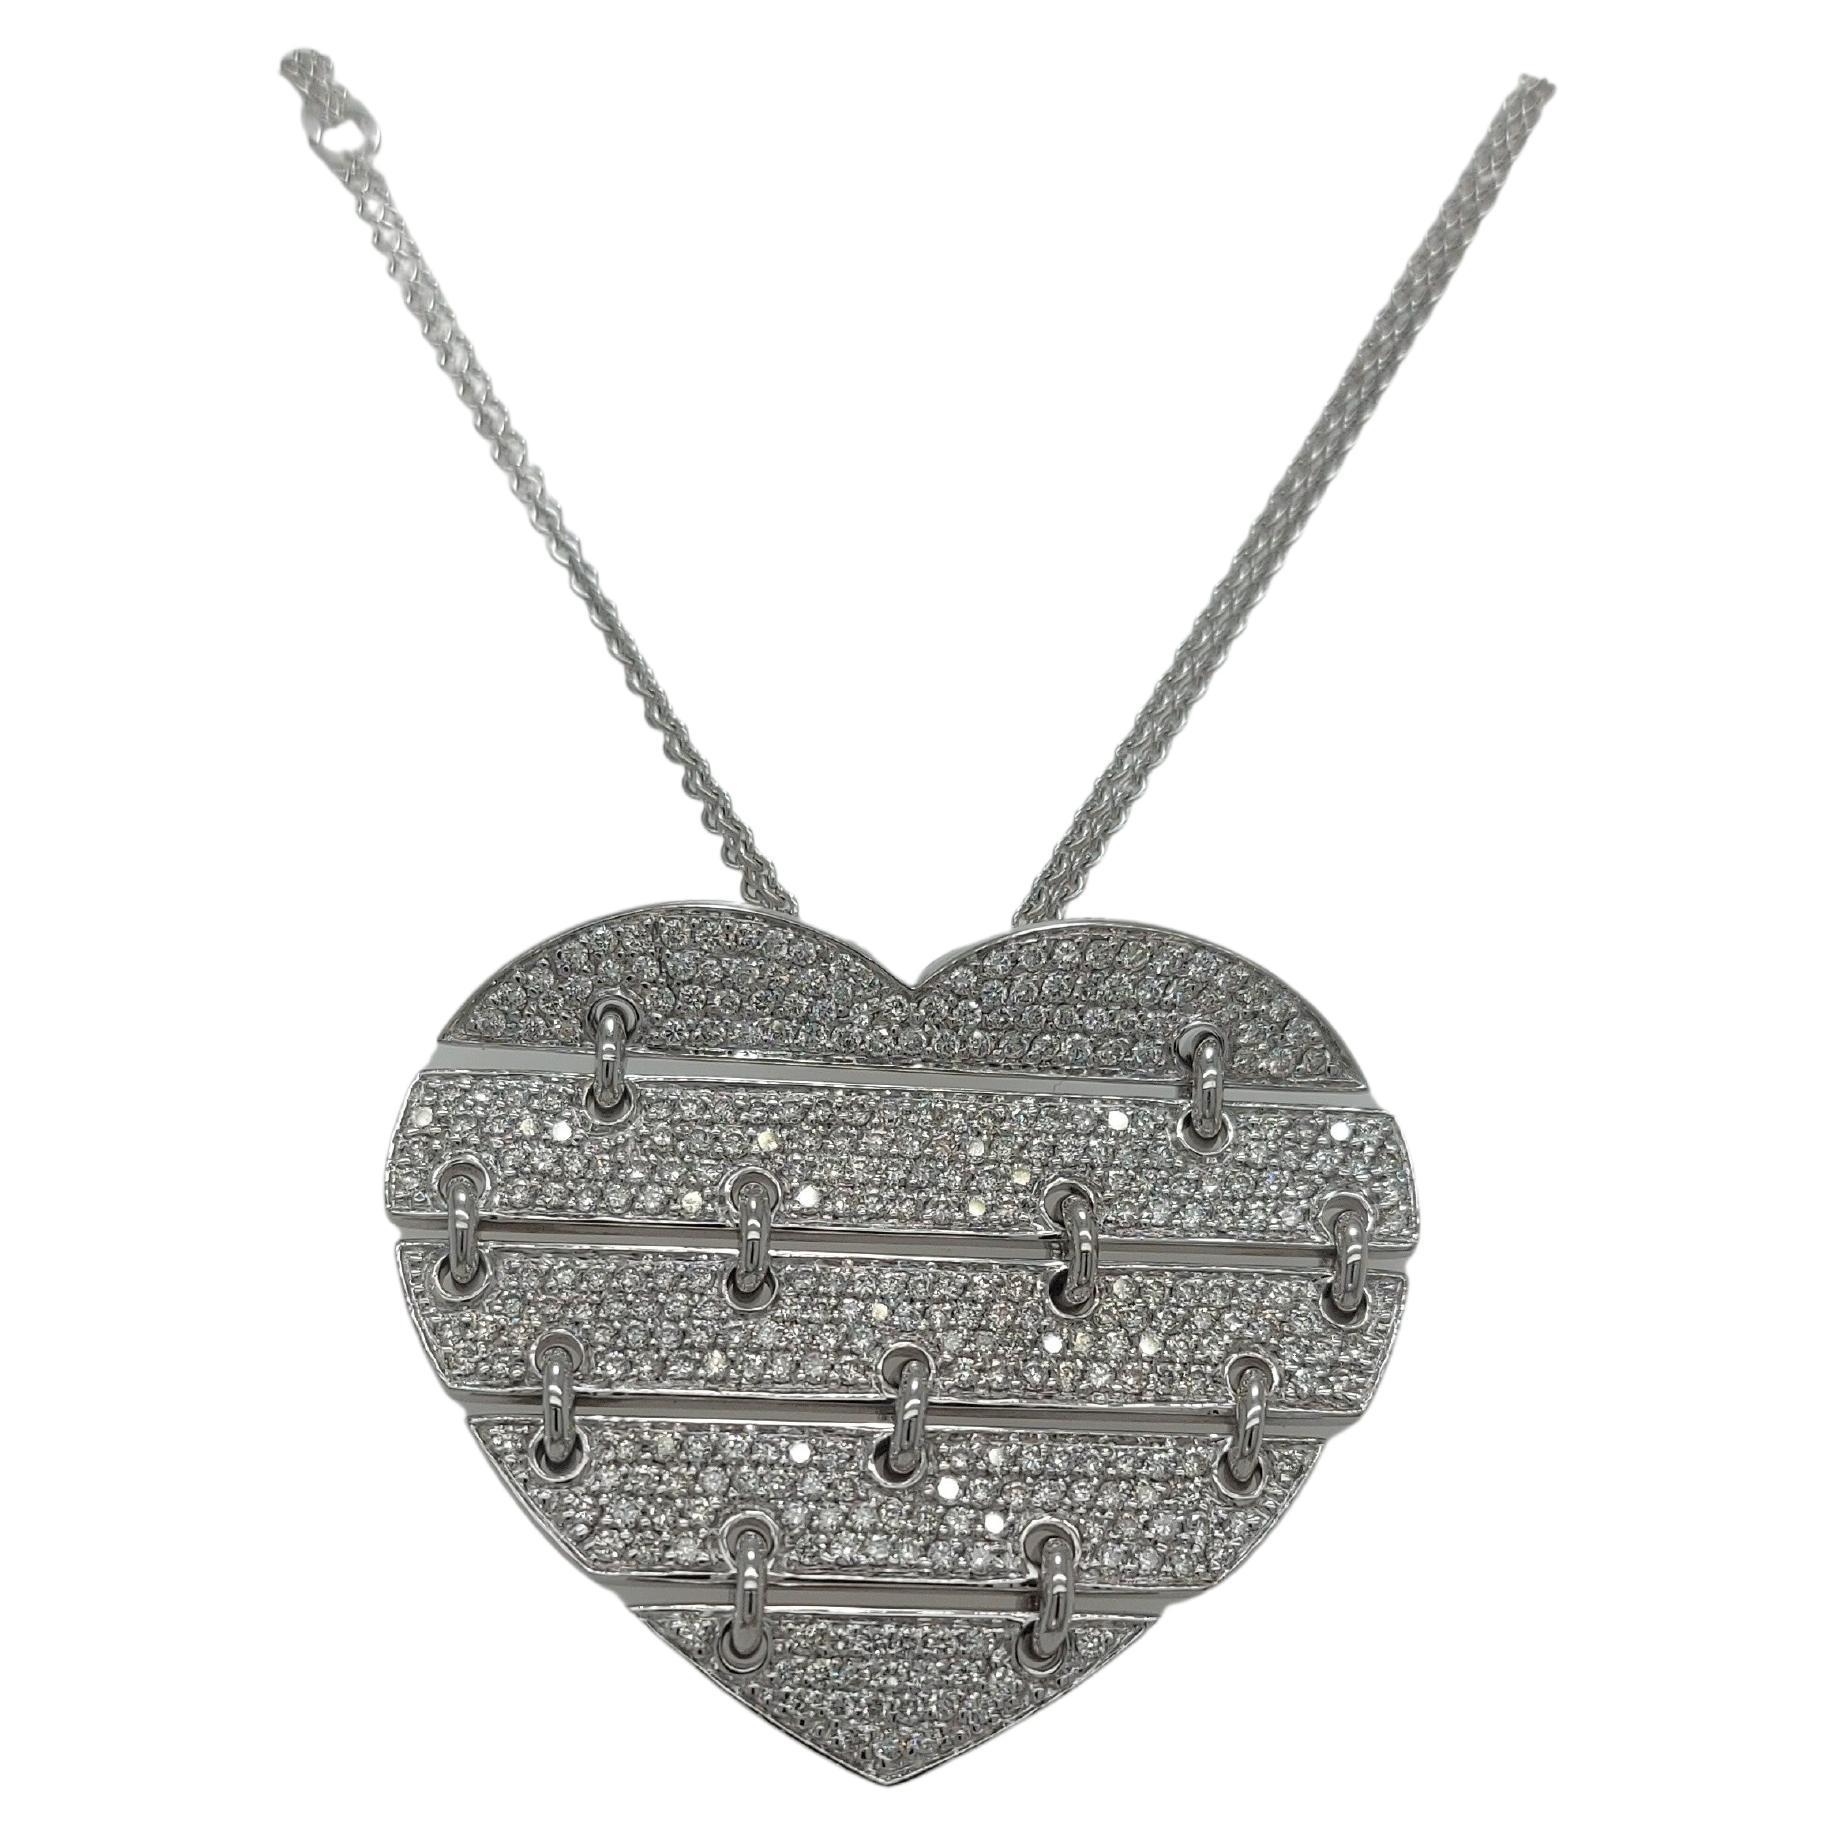 18kt White Gold "Dancing" Heart Pendant, Necklace with 2.5 ct White Diamonds For Sale